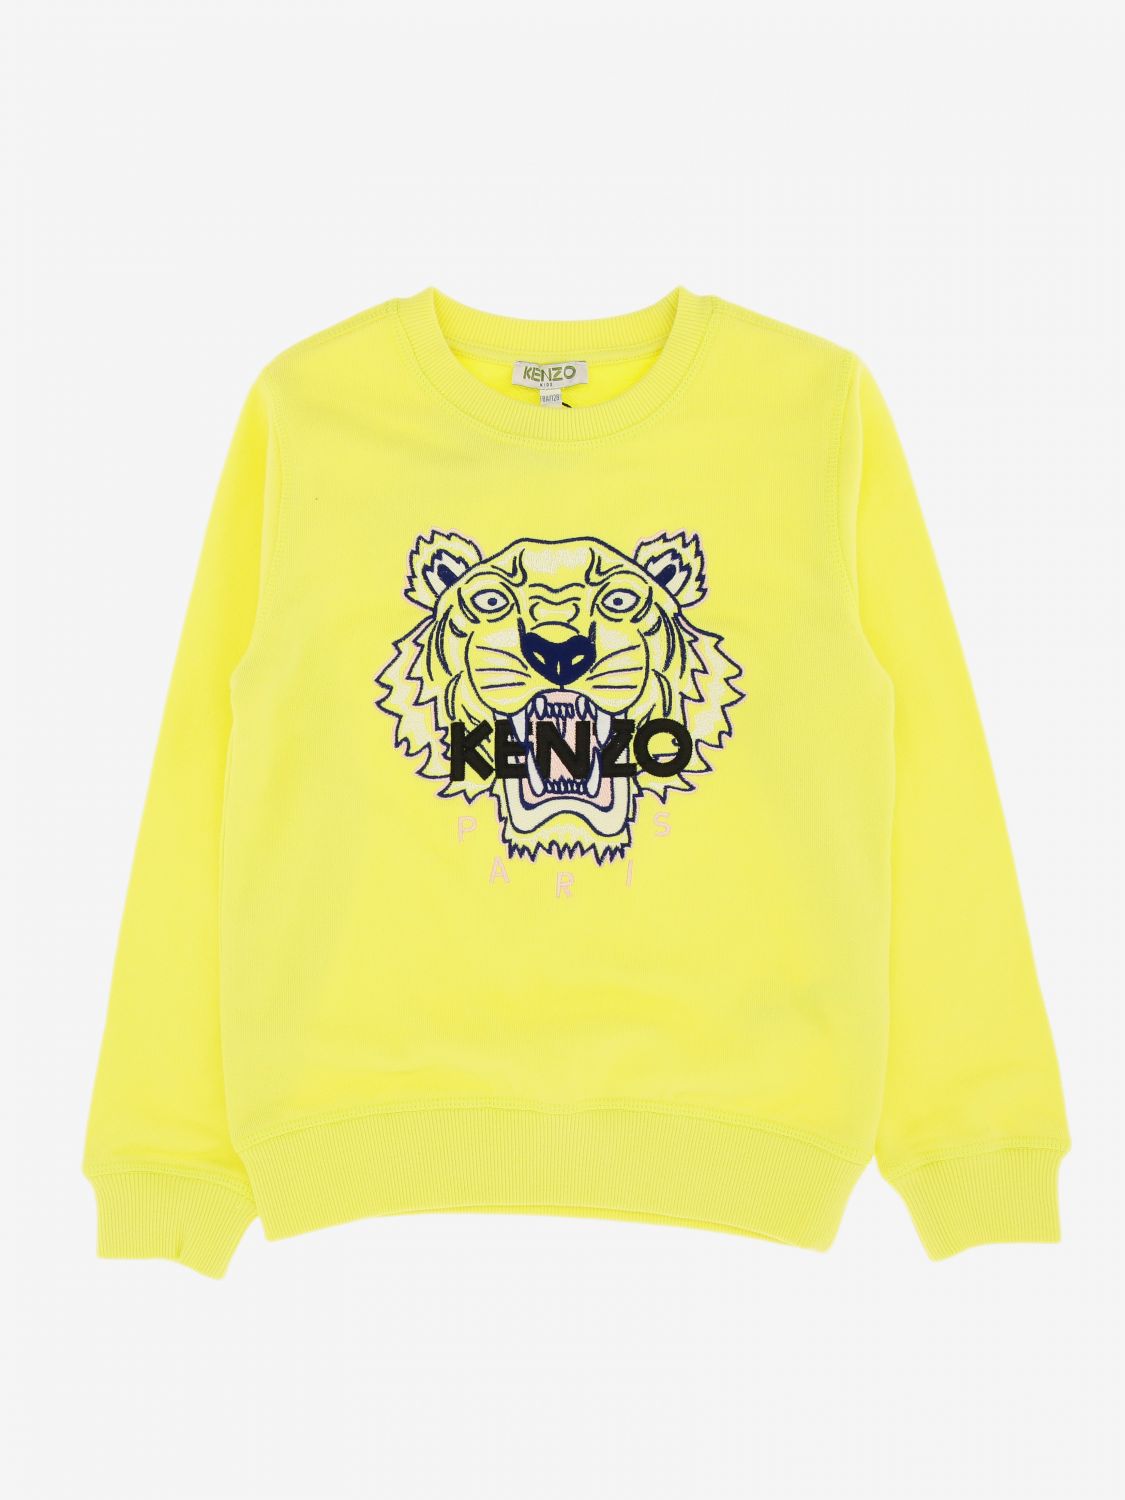 kenzo outlet kids